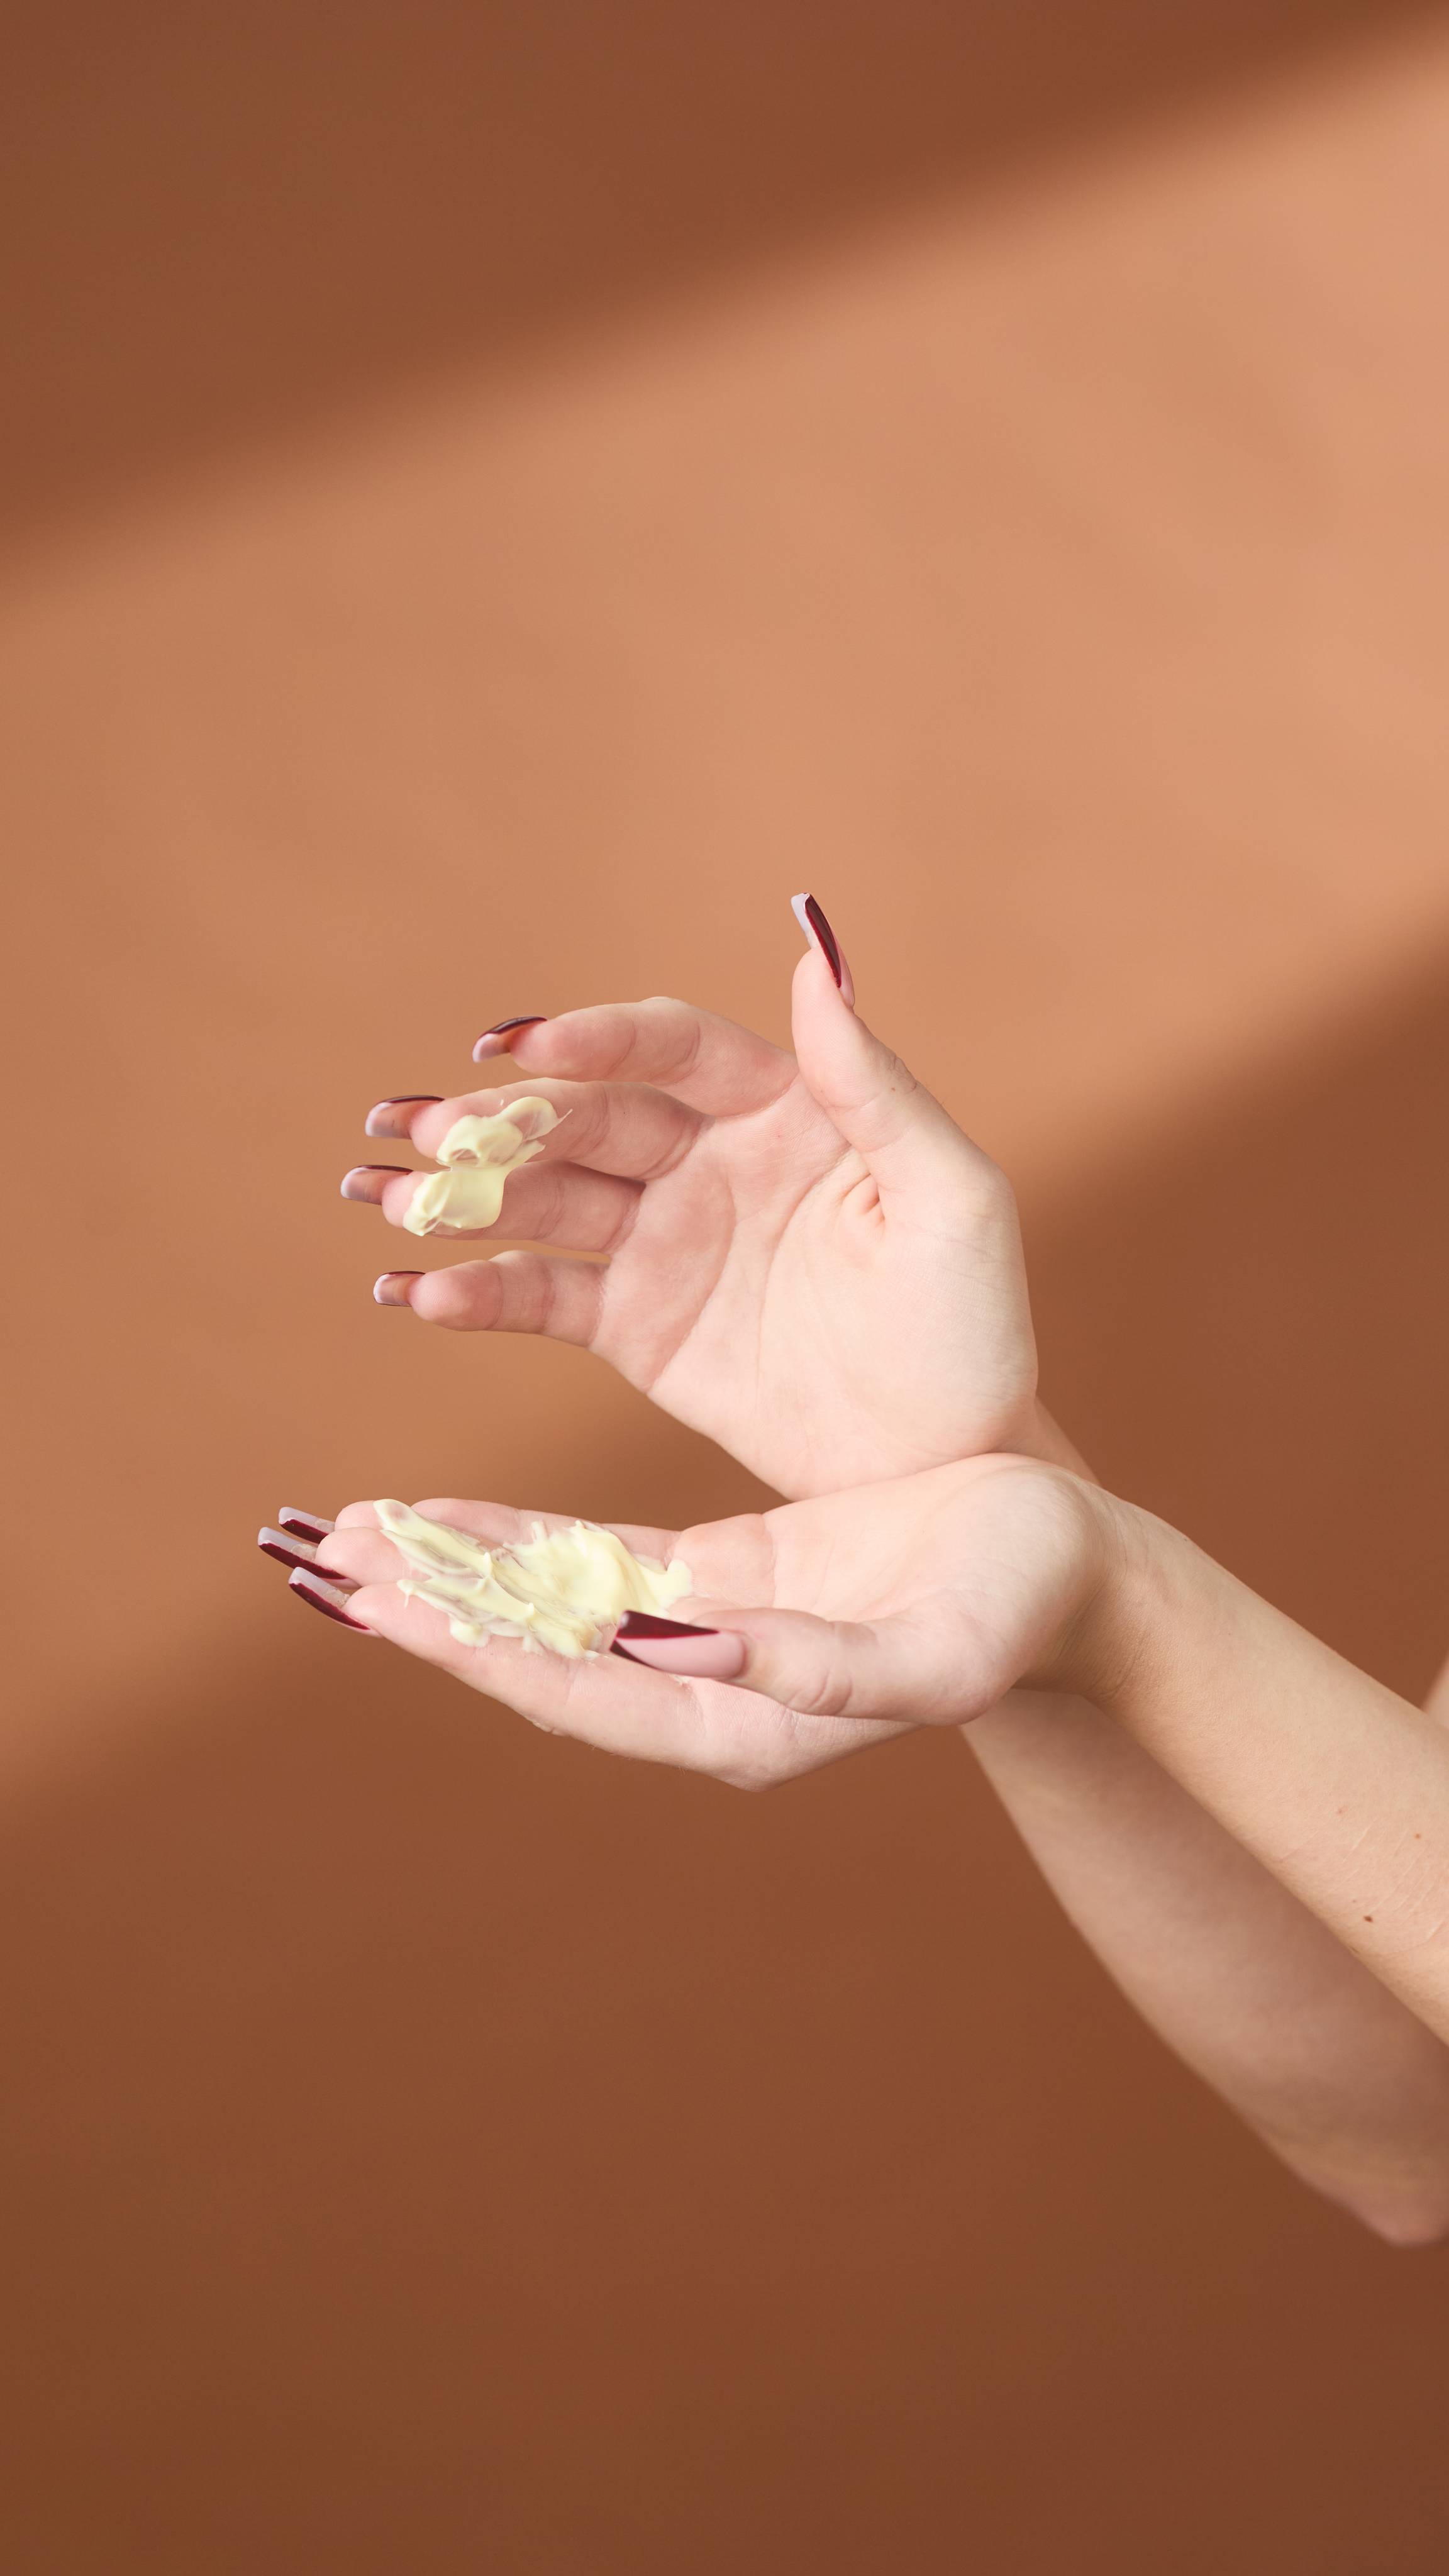 A close-up of the model's hands and forearms as they gently rub the Let The Good Times Roll body lotion between their fingers. 